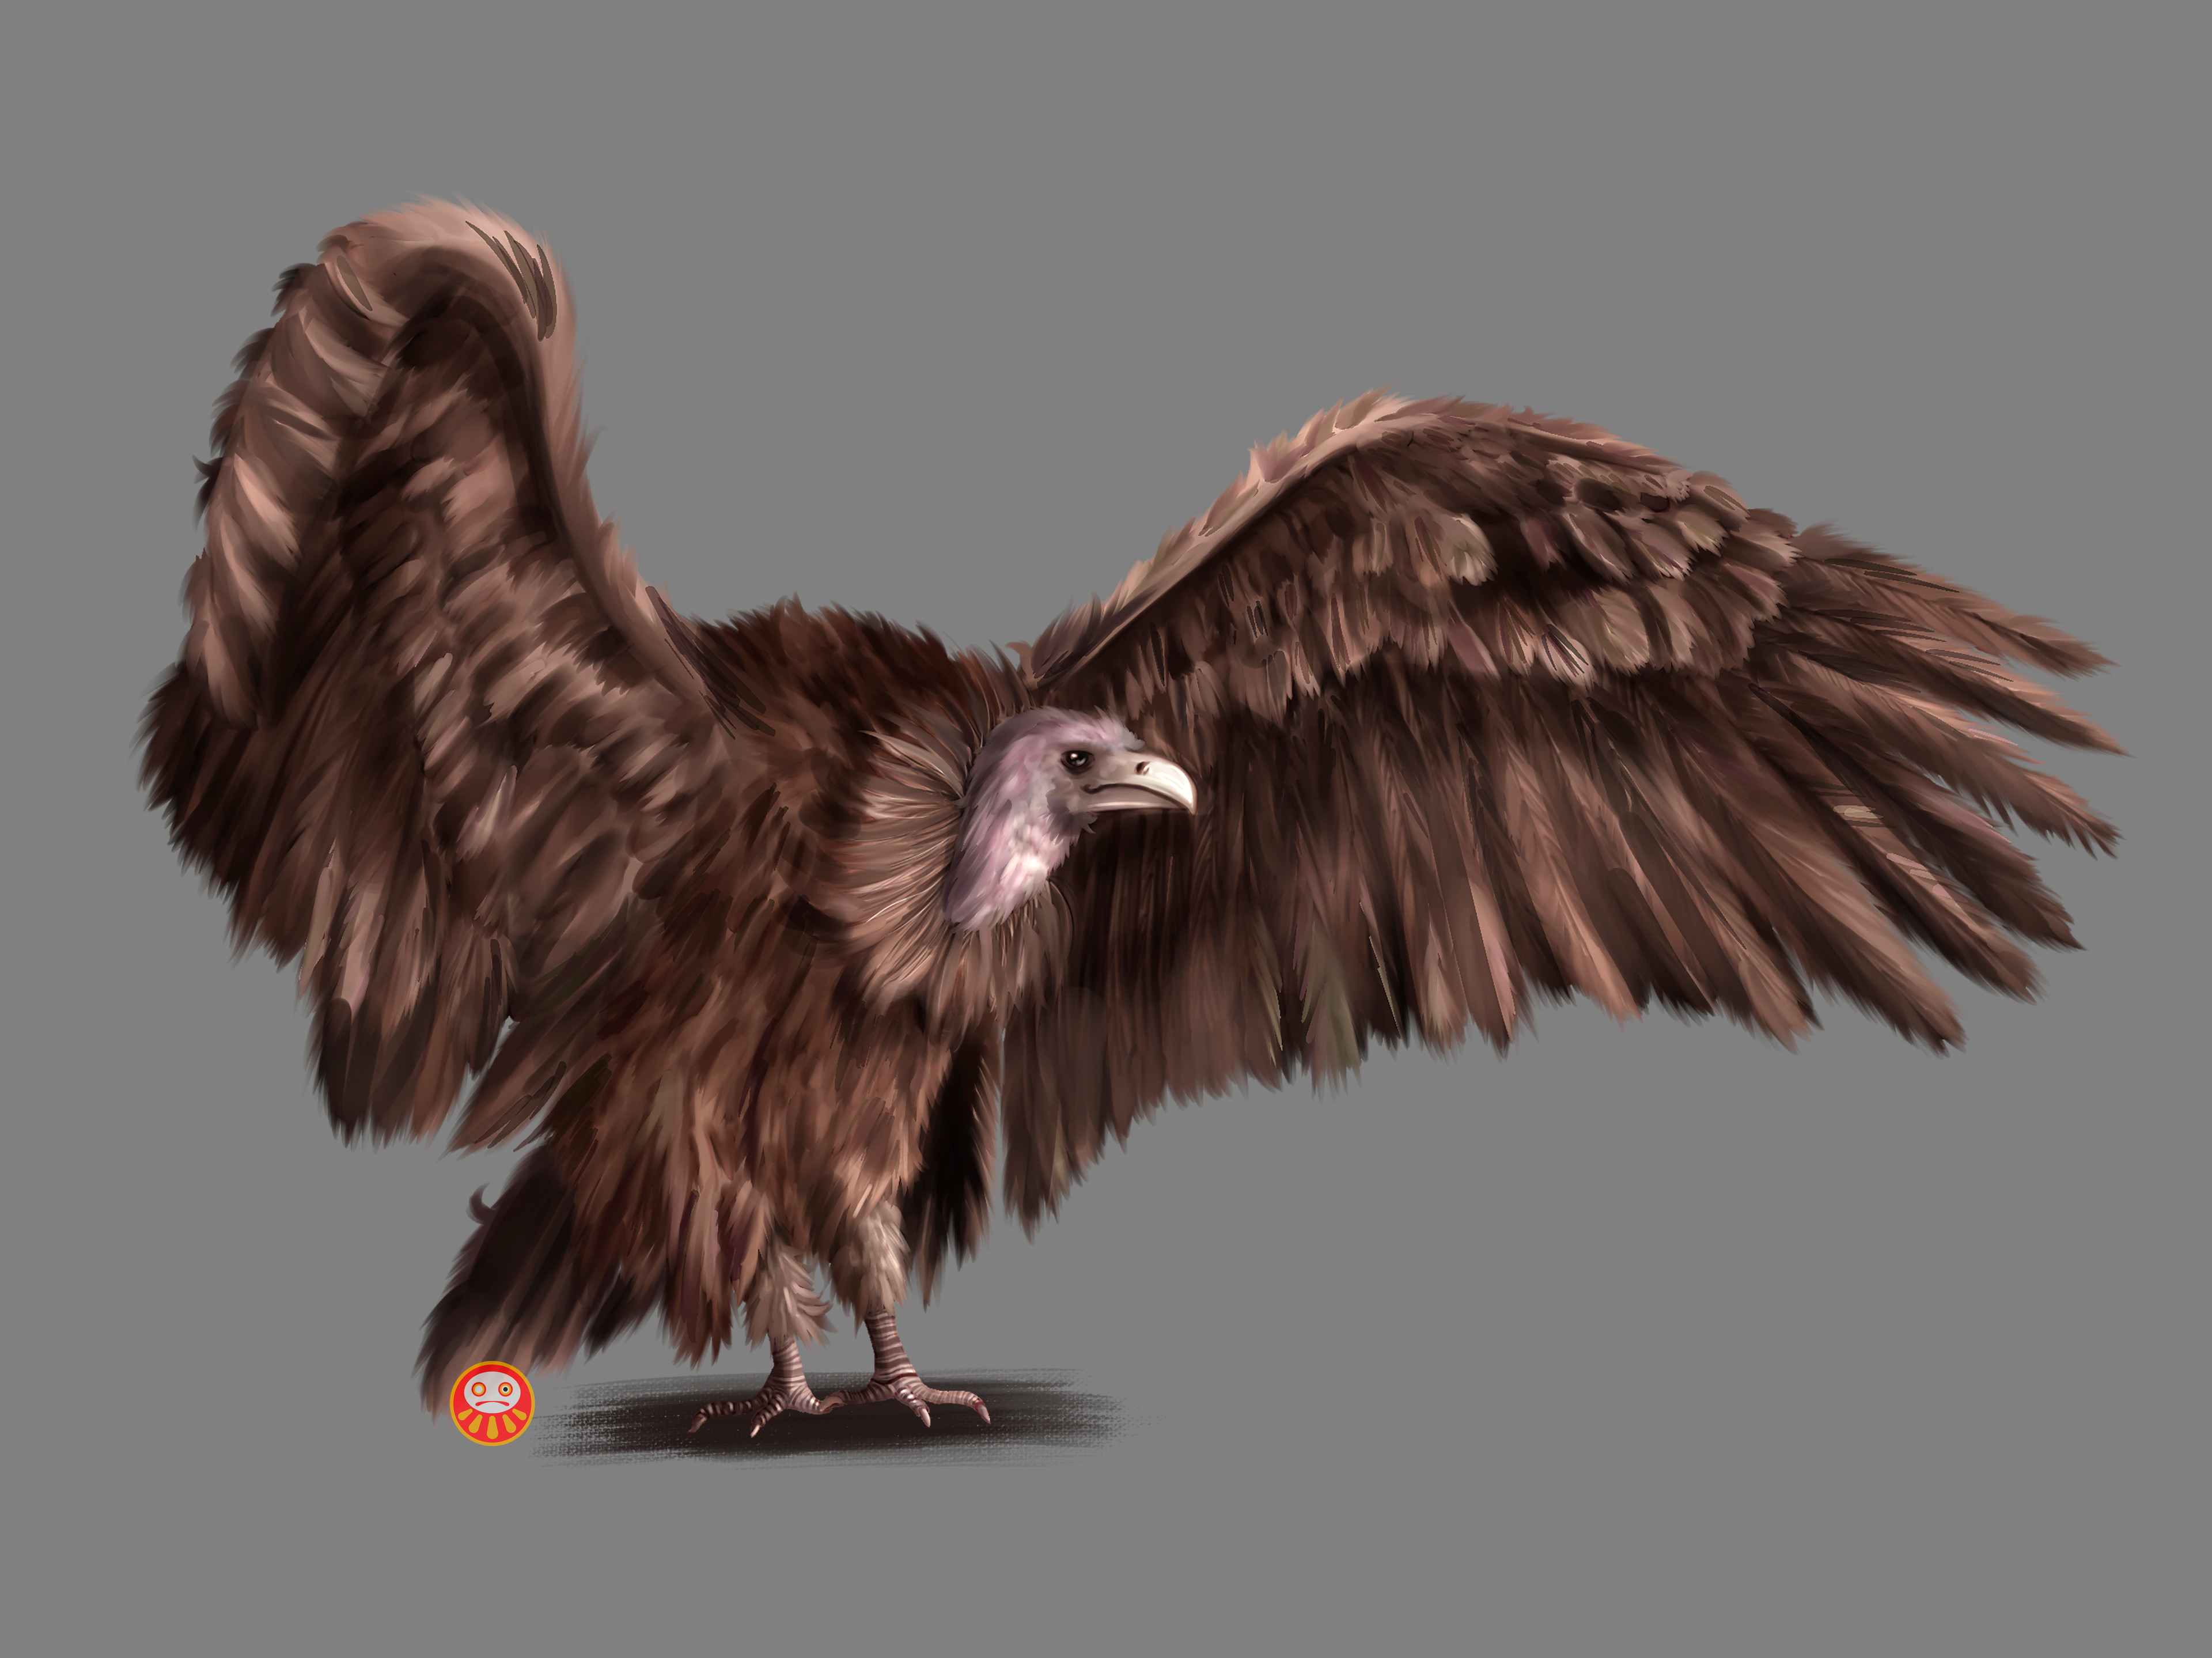 Giant Vulture